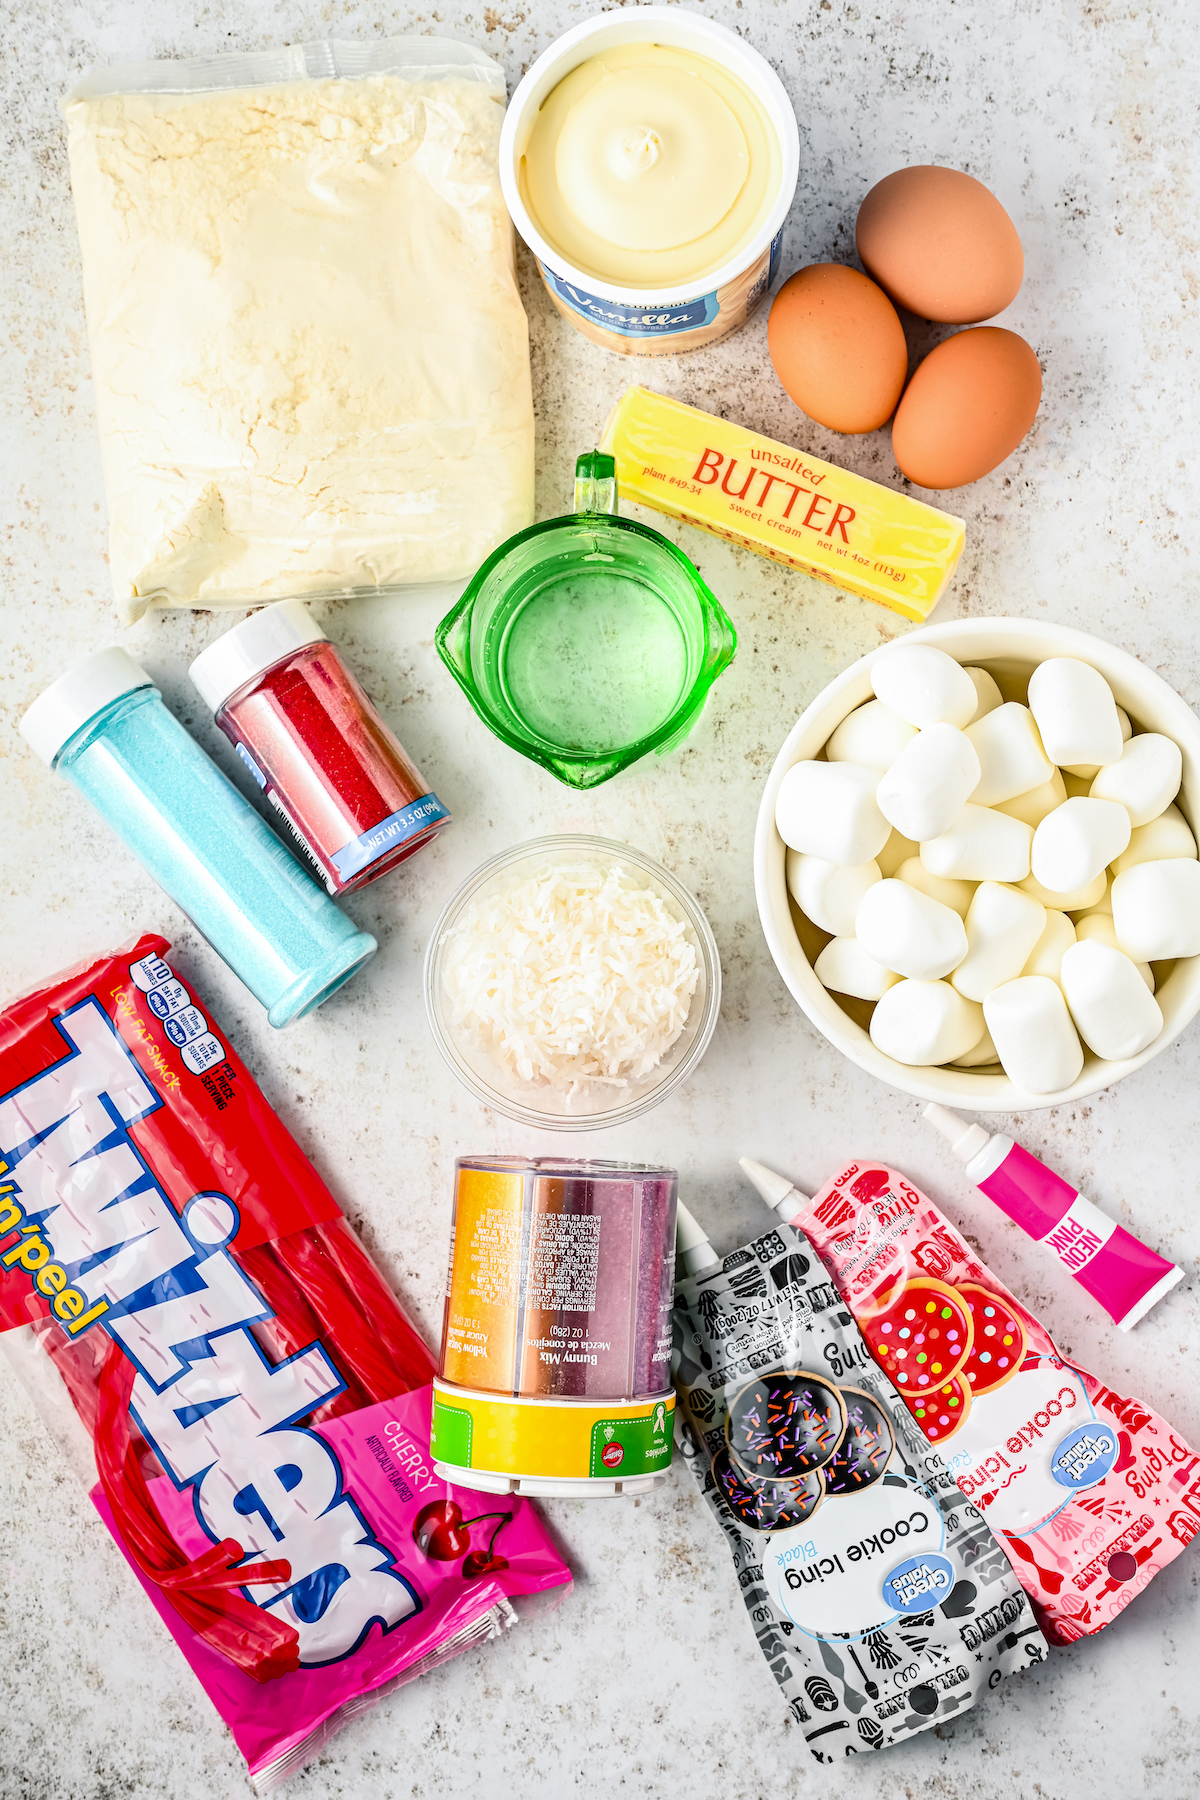 Cake mix, eggs, and other cake ingredients, along with marshmallows, icing, colored sugar, and candy.